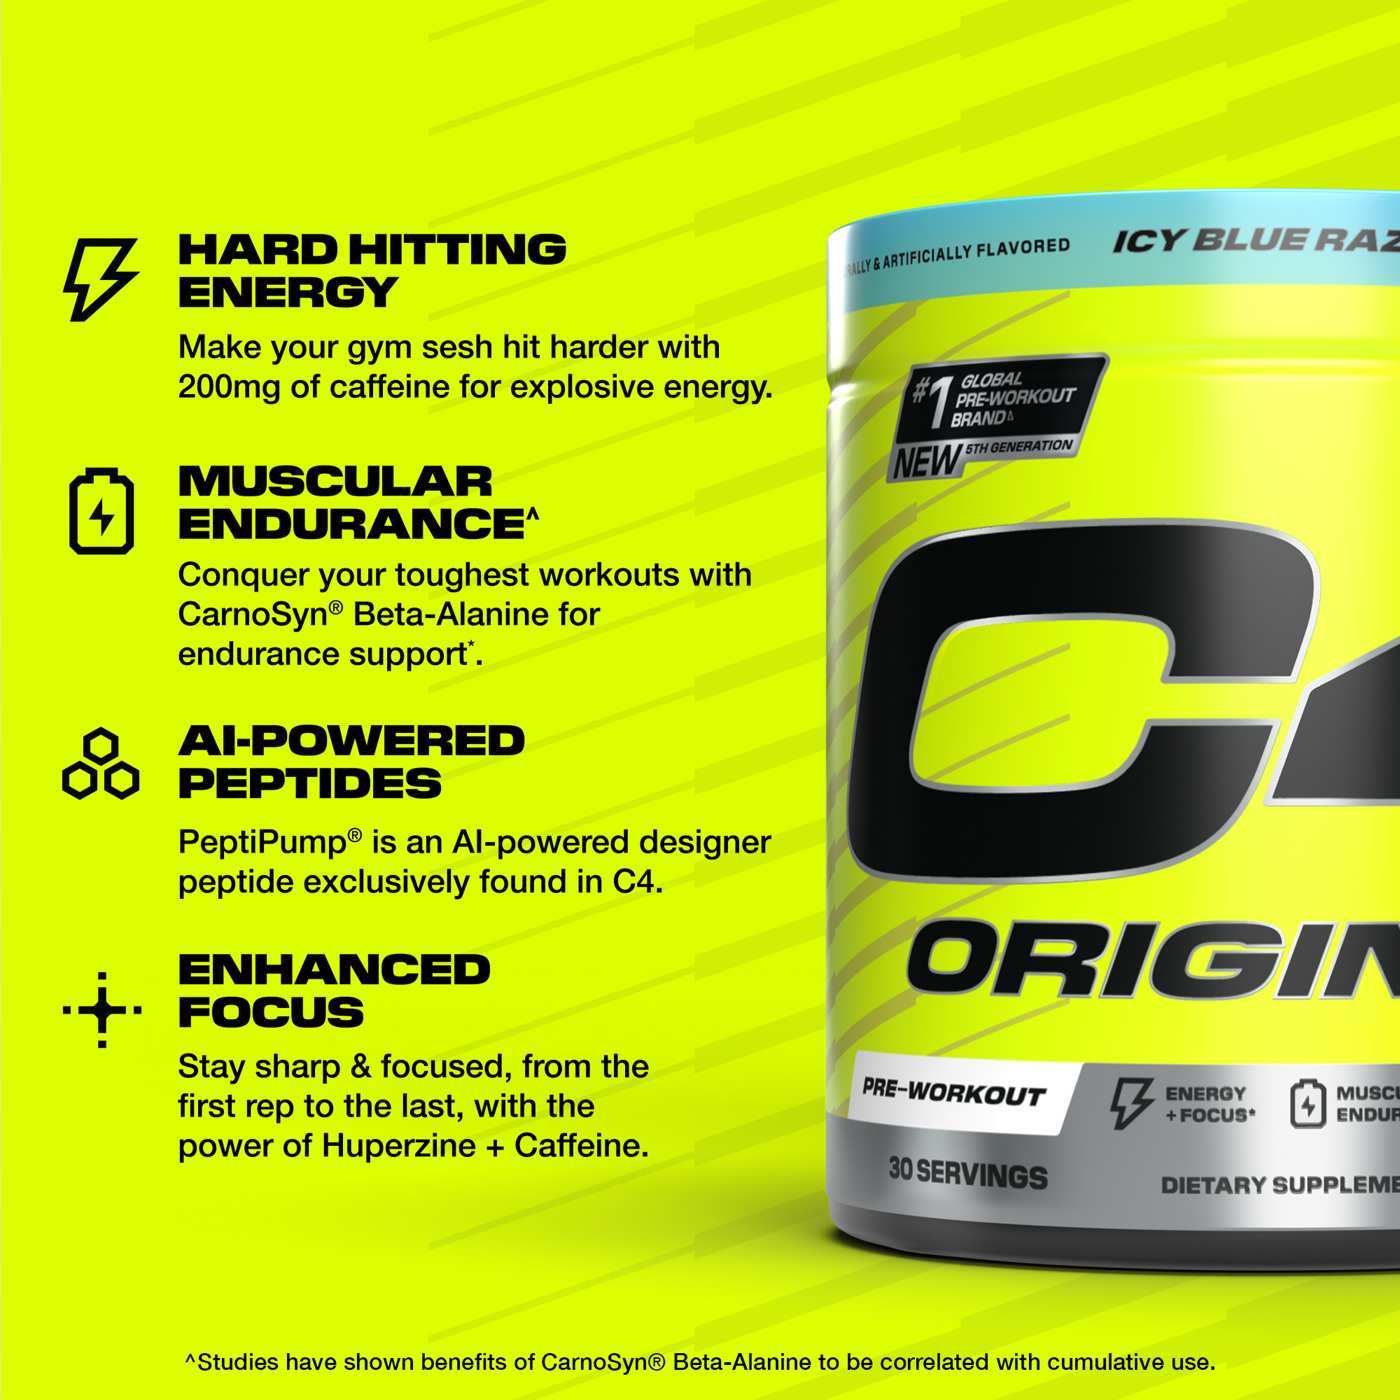 Cellucor C4 Original Pre-Workout - Icy Blue Razz; image 3 of 5